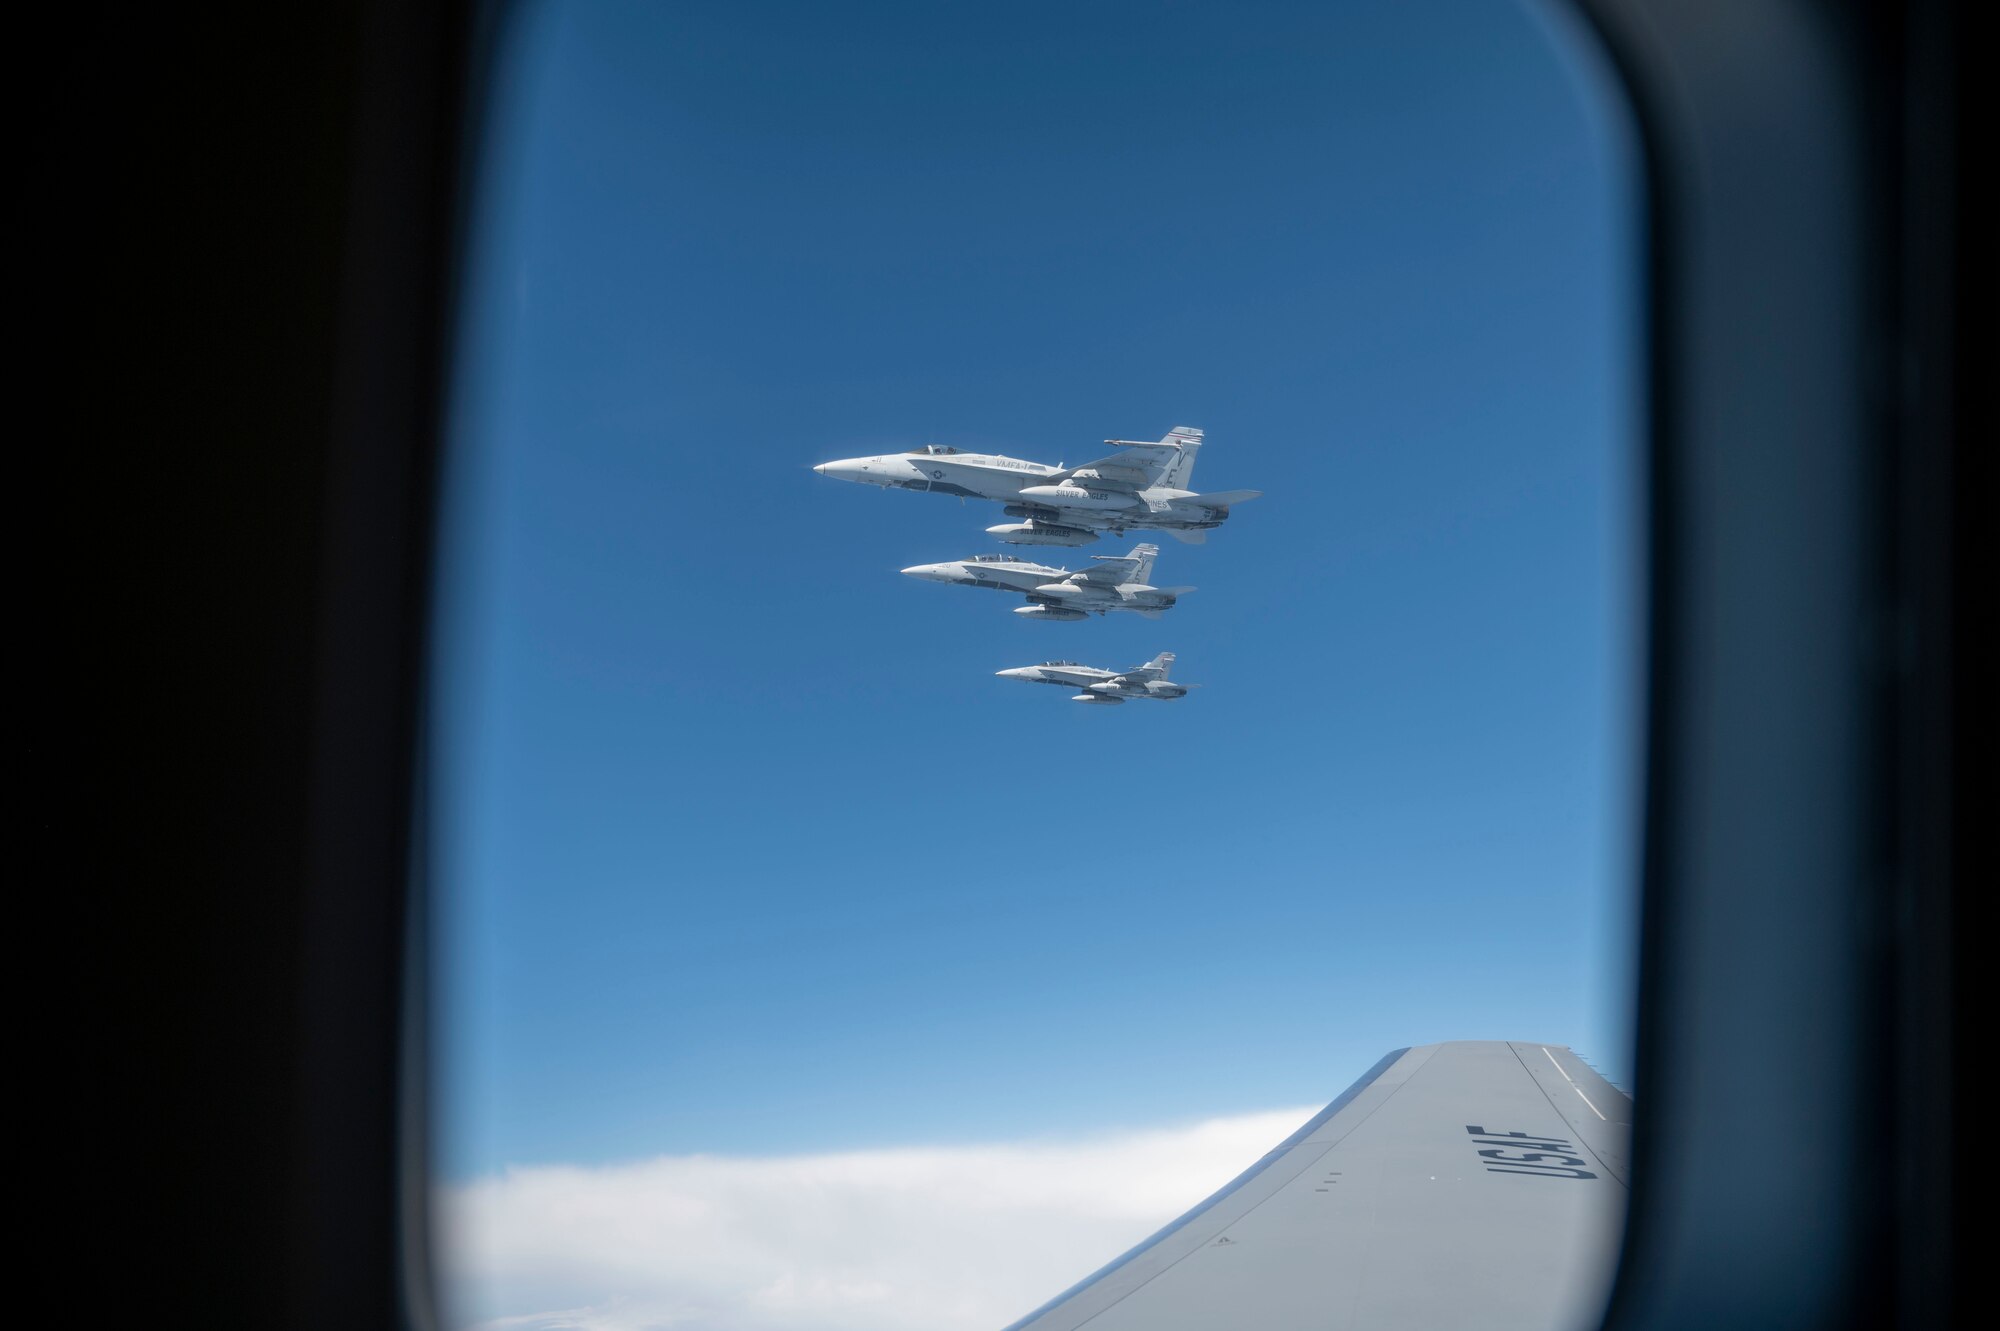 F/A-18s assigned to Marine Fighter Attack Squadron 115 “Silver Eagles” from Marine Corps Air Station Beaufort, South Carolina, fly in formation alongside a KC-46A Pegasus assigned to the 916th Air Refueling Wing from Seymour Johnson Air Force Base, North Carolina, during an aerial refueling operation off the coast of North Carolina following Exercise Razor Talon May 19, 2022. The Silver Eagles were activated on July 1, 1943, and have conducted combat operations during World War II, the Korean War, the Vietnam War and the Global War on Terrorism. (U.S. Air Force photo by Senior Airman Kevin Holloway)